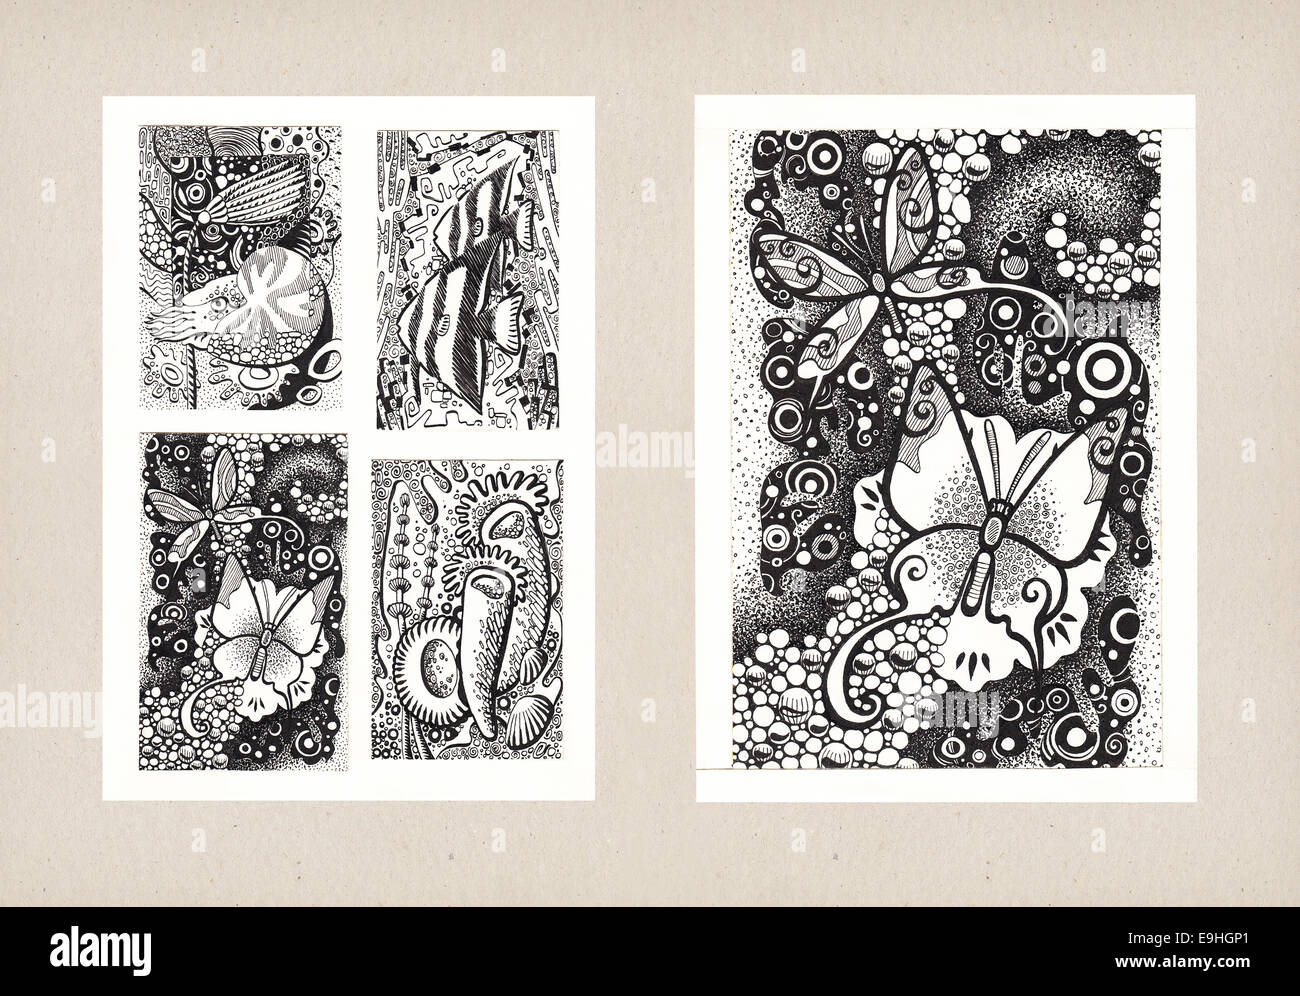 Illustrations of Animal Themes (Ink) Stock Photo